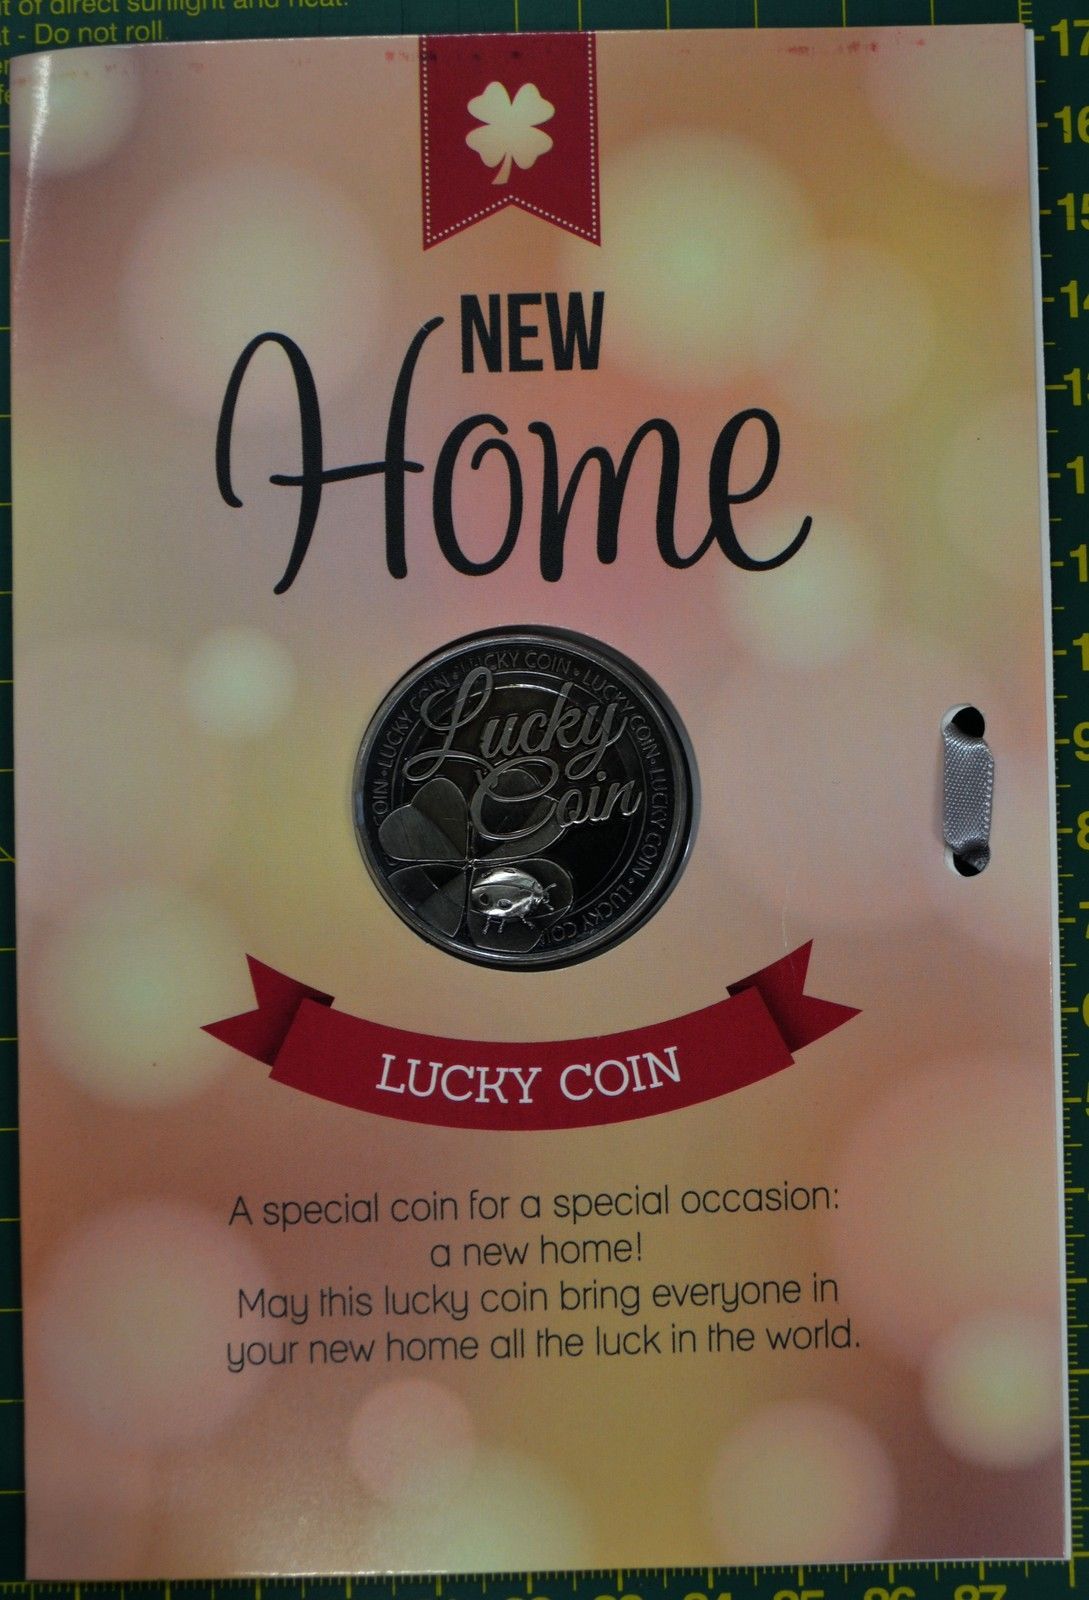 New Home, Card & Lucky Coin, 115 x 170mm, Luck Coin 35mm